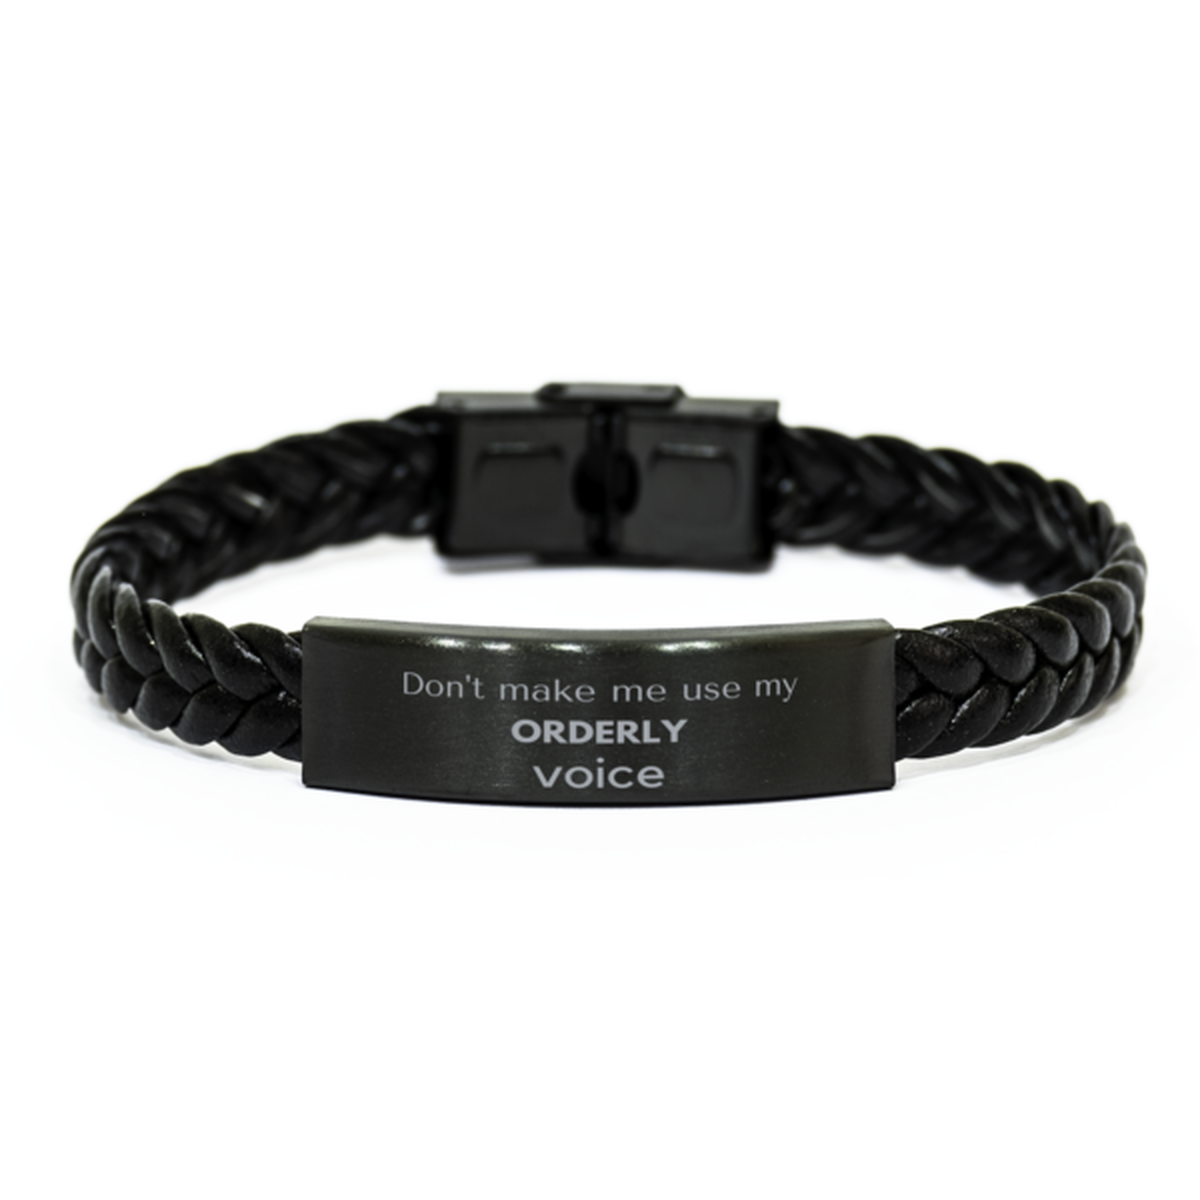 Don't make me use my Orderly voice, Sarcasm Orderly Gifts, Christmas Orderly Braided Leather Bracelet Birthday Unique Gifts For Orderly Coworkers, Men, Women, Colleague, Friends